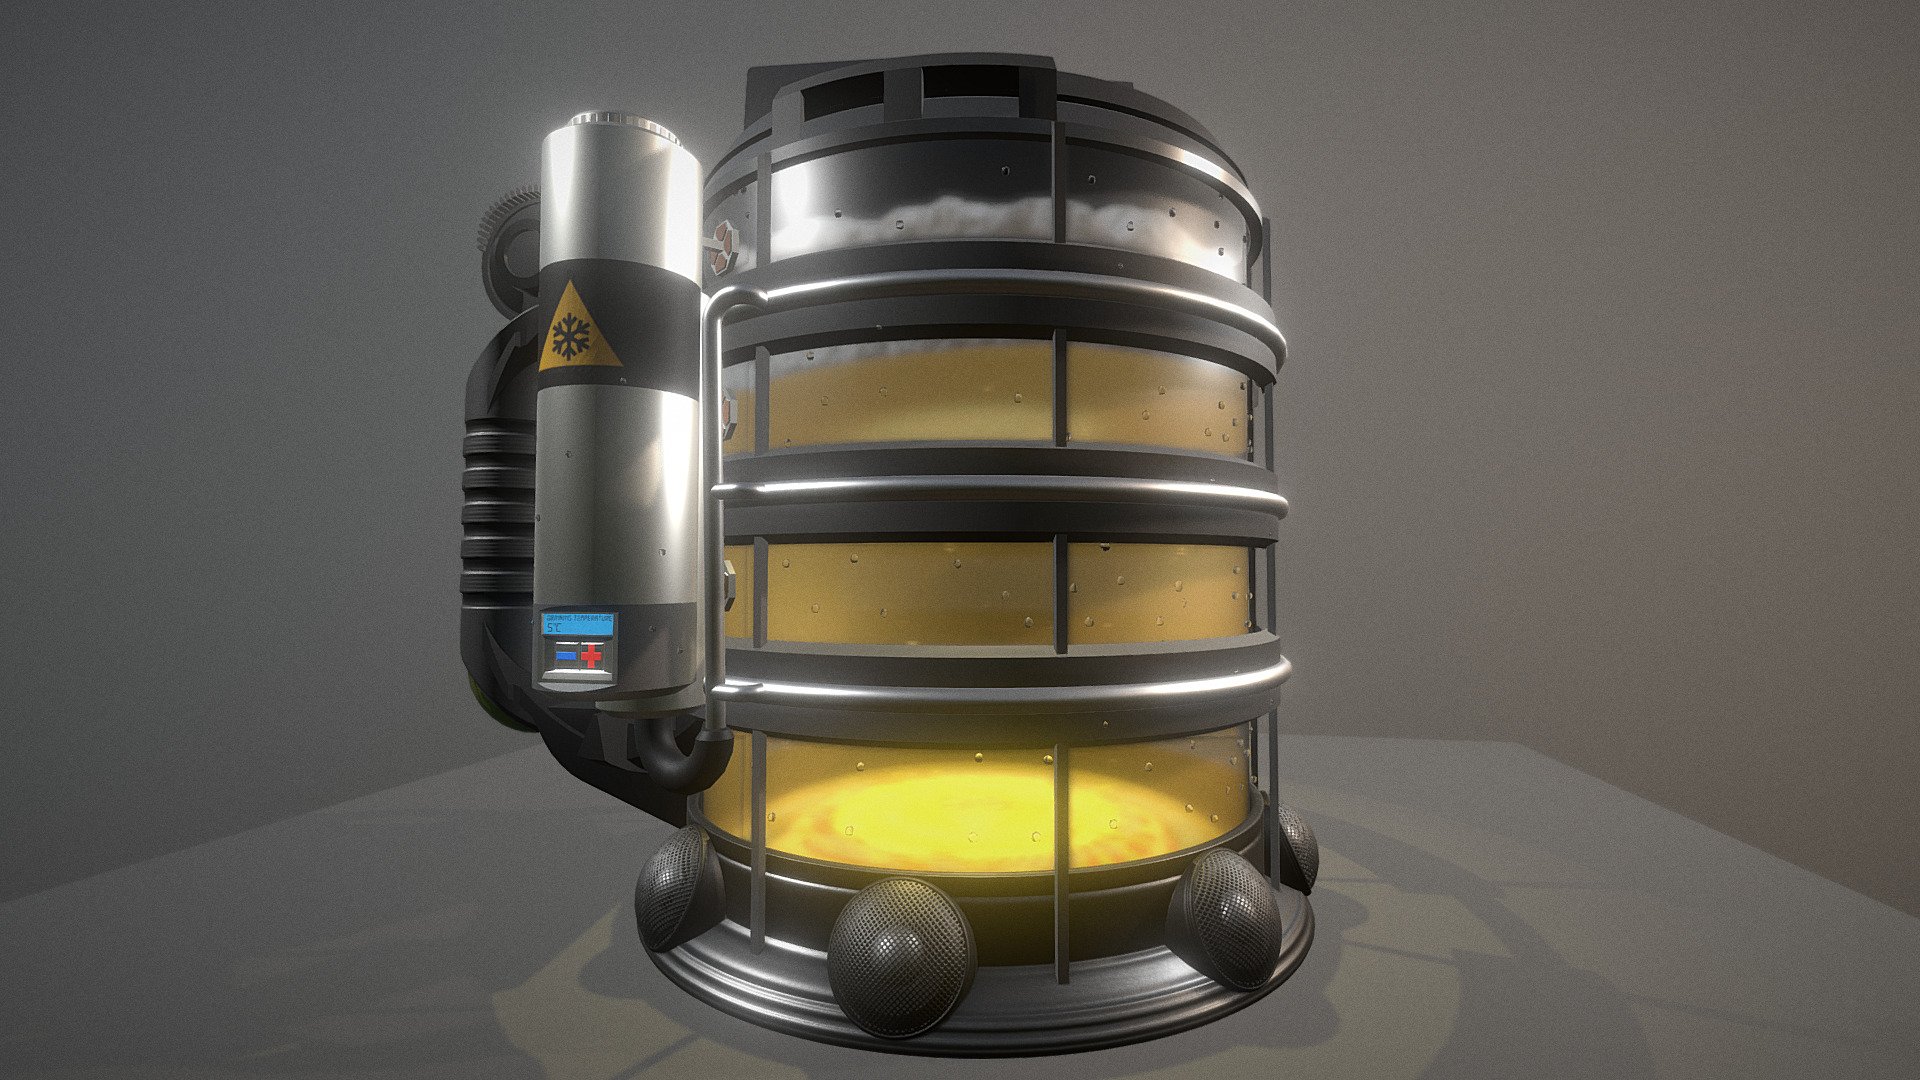 Here is my beer mug wip-4 for the Sketchfab Freeform Challenge: GDC Beer Bust!



Here are some new update for my beer mug.



The Beer-portal its activated :)





The speaker grid had too many polygons, so I created a 1k normalmap for it.



My to do-list for this:




Grip for the thumb (done)

Cooling-unit and pipe-system for the liquid nitrogen (done)

Condensation drops (done)

Beer-payment-system (done)

carbon dioxide bubbles (done)

Cartridge for restoring the carbon dioxide (done)

Sound-system (done)

Beer-portal-system (done)

Beer planet (open)

Low-Poly model and textures (~30% done)

Modeled, textured, rigged and animated in Blender as usual :)
https://www.blender.org/download - [WIP-4] Infinite Beer Mug From The Future - Download Free 3D model by 3DHaupt (@dennish2010) 3d model